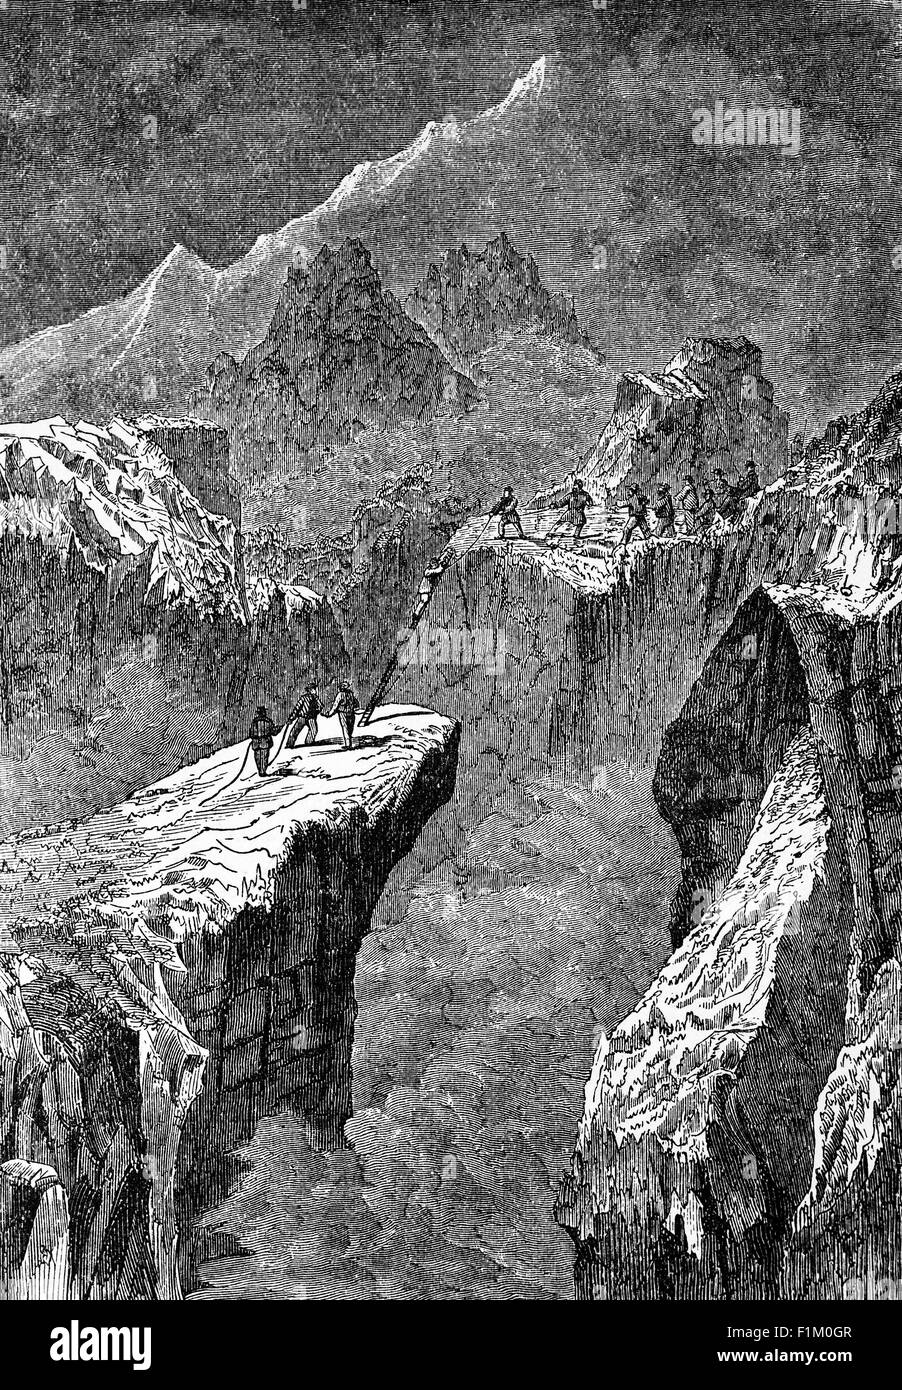 A group of climbers in the Swiss Alps. By the early 19th century, many of the alpine peaks were reached, the most dramatic of which  was the spectacular first ascent of the Matterhorn in 1865 by a party led by English illustrator Edward Whymper. Despite the sport of mountaineering having largely reached its modern form, with a large body of professional guides, equipment, and methodologies, four of the party members fell to their deaths. Stock Photo